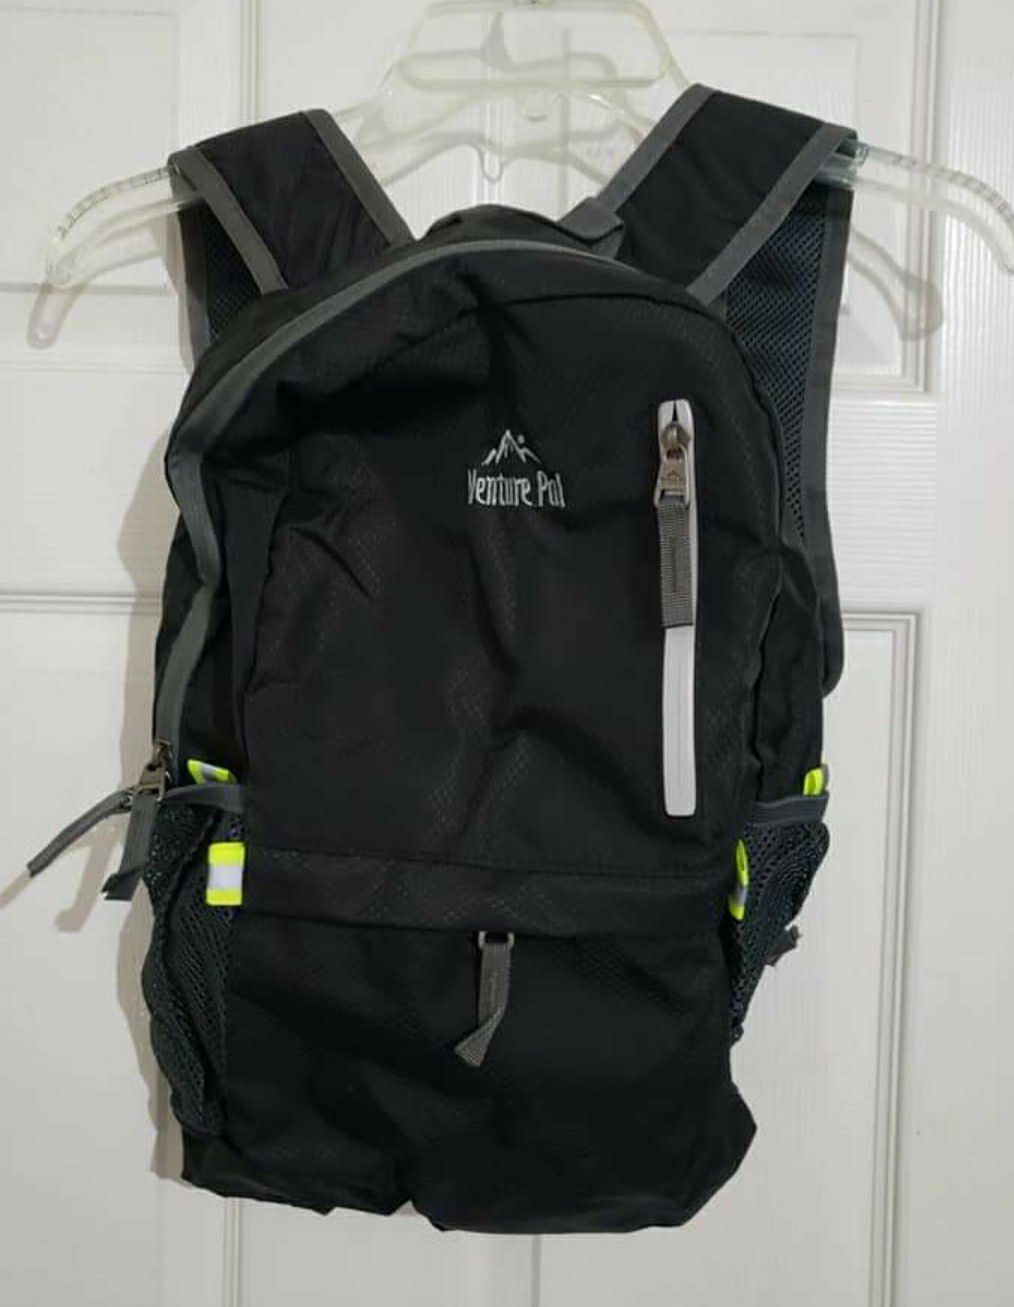 BRAND NEW WITH TAGS Hiking Daypack – Travel Backpack – Durable Packable Lightweight Small Backpack.